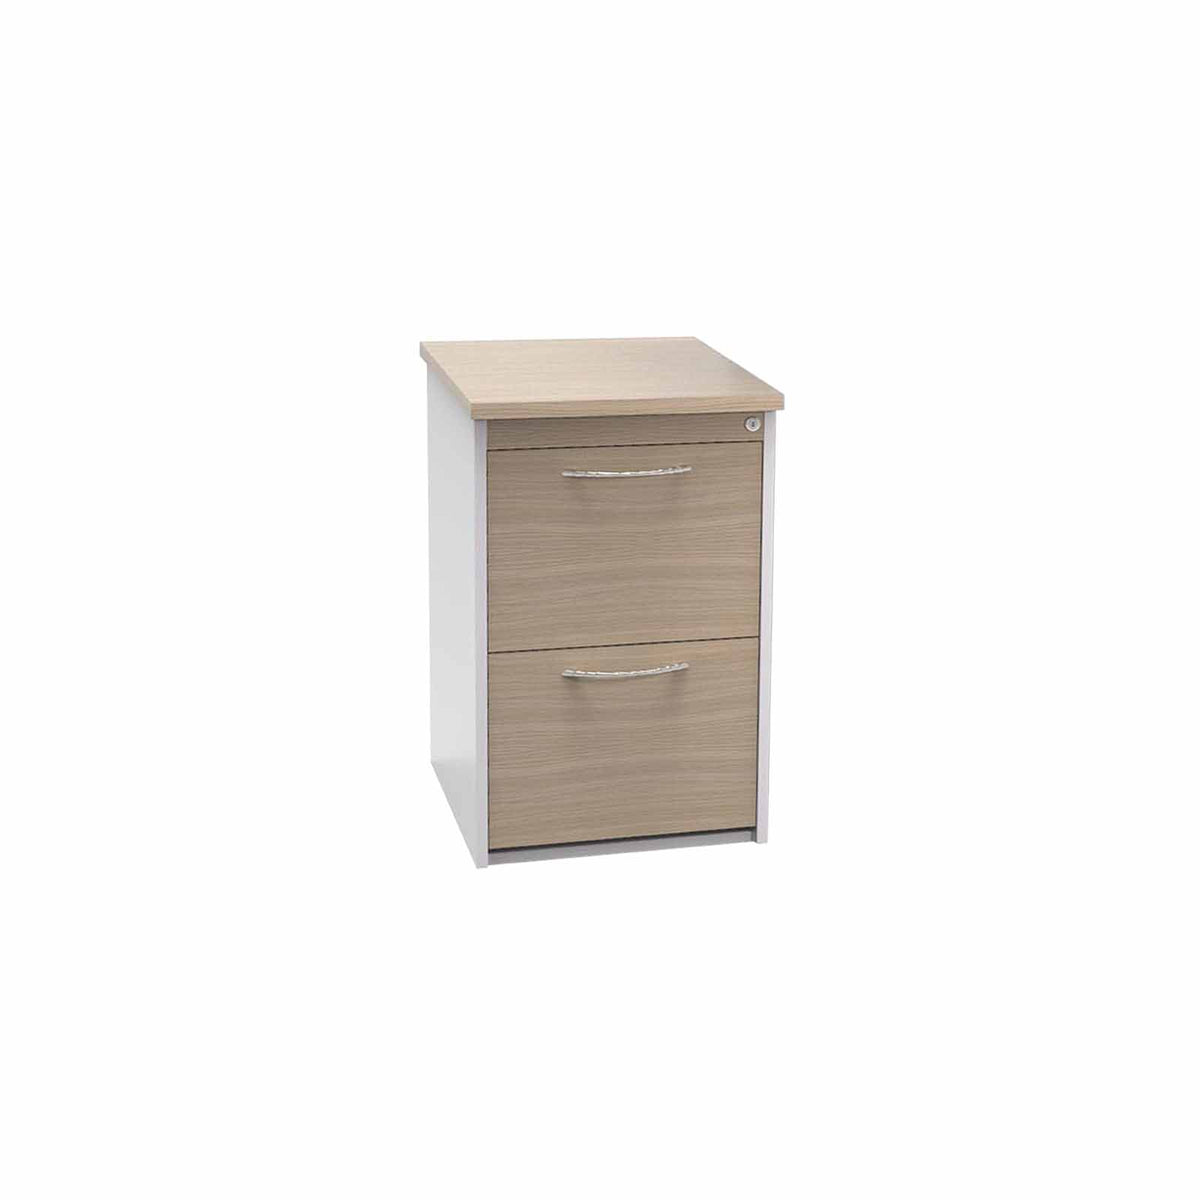 MADE TO ORDER Filing Cabinet 4 Drawer W480 x D600 x H 1375